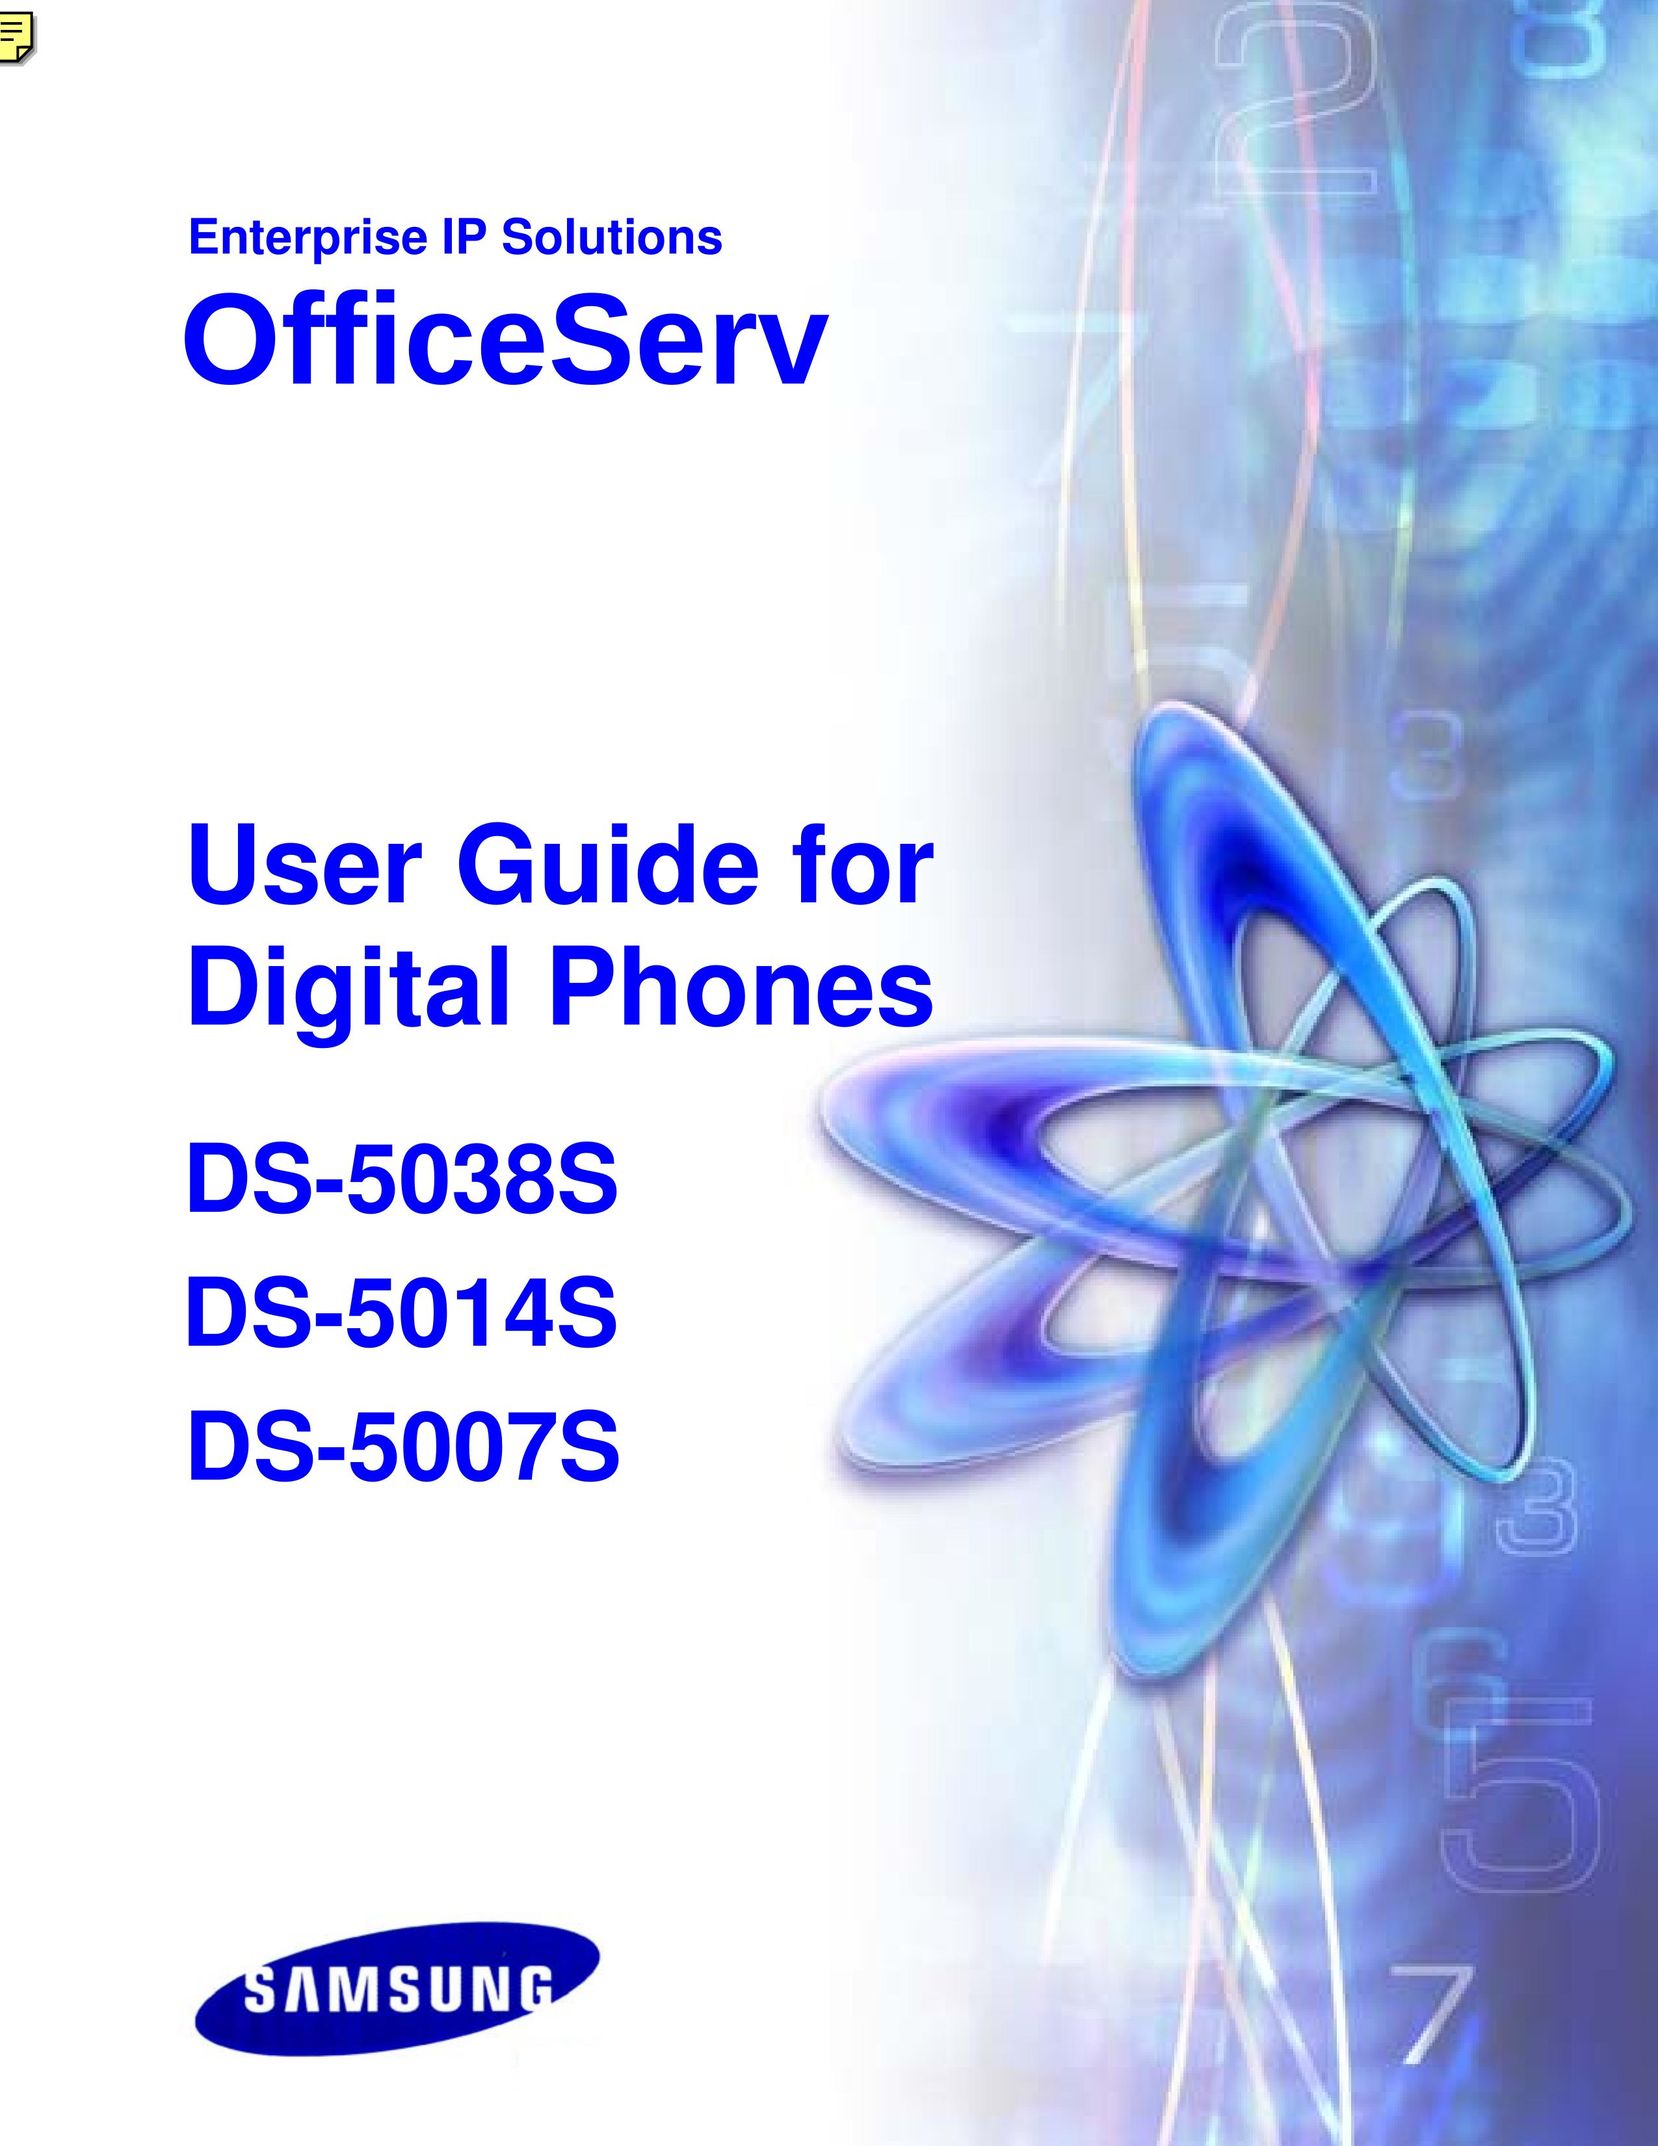 Samsung DS-5007S Telephone User Manual